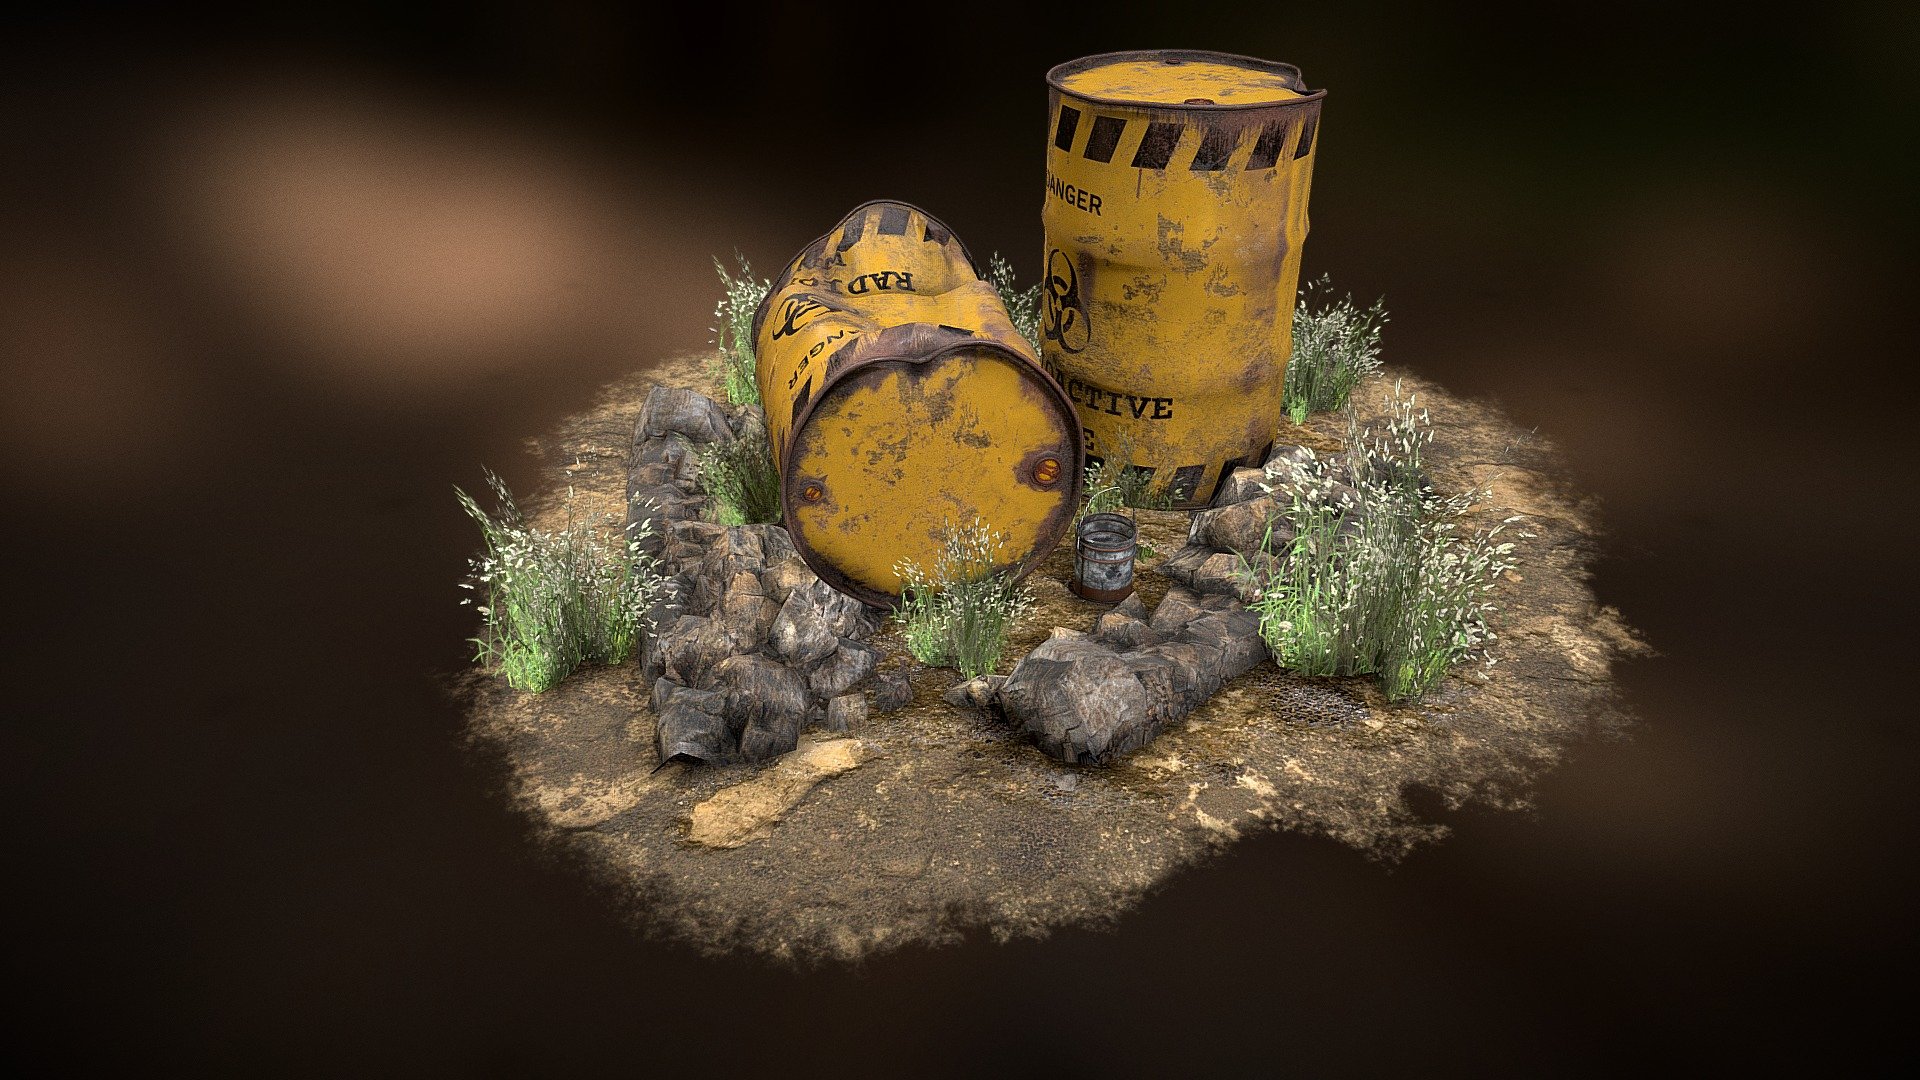 Damaged Metal Barrel Low poly game asset 3D Model From Scratch with 4K PBR textures maps by 13Particles. 

For more artworks and updates follow us on:-

Instagram:- https://www.instagram.com/13particles/

Artstation:- https://thirteenparticles.artstation.com

Twitter:- https://twitter.com/13Particles

Facebook:- https://www.facebook.com/13Particles/

Linkedin:- https://www.linkedin.com/company/13particles - Damaged Metal Barrel ( In House Project ) - 3D model by 13 Particles (@13particles) 3d model